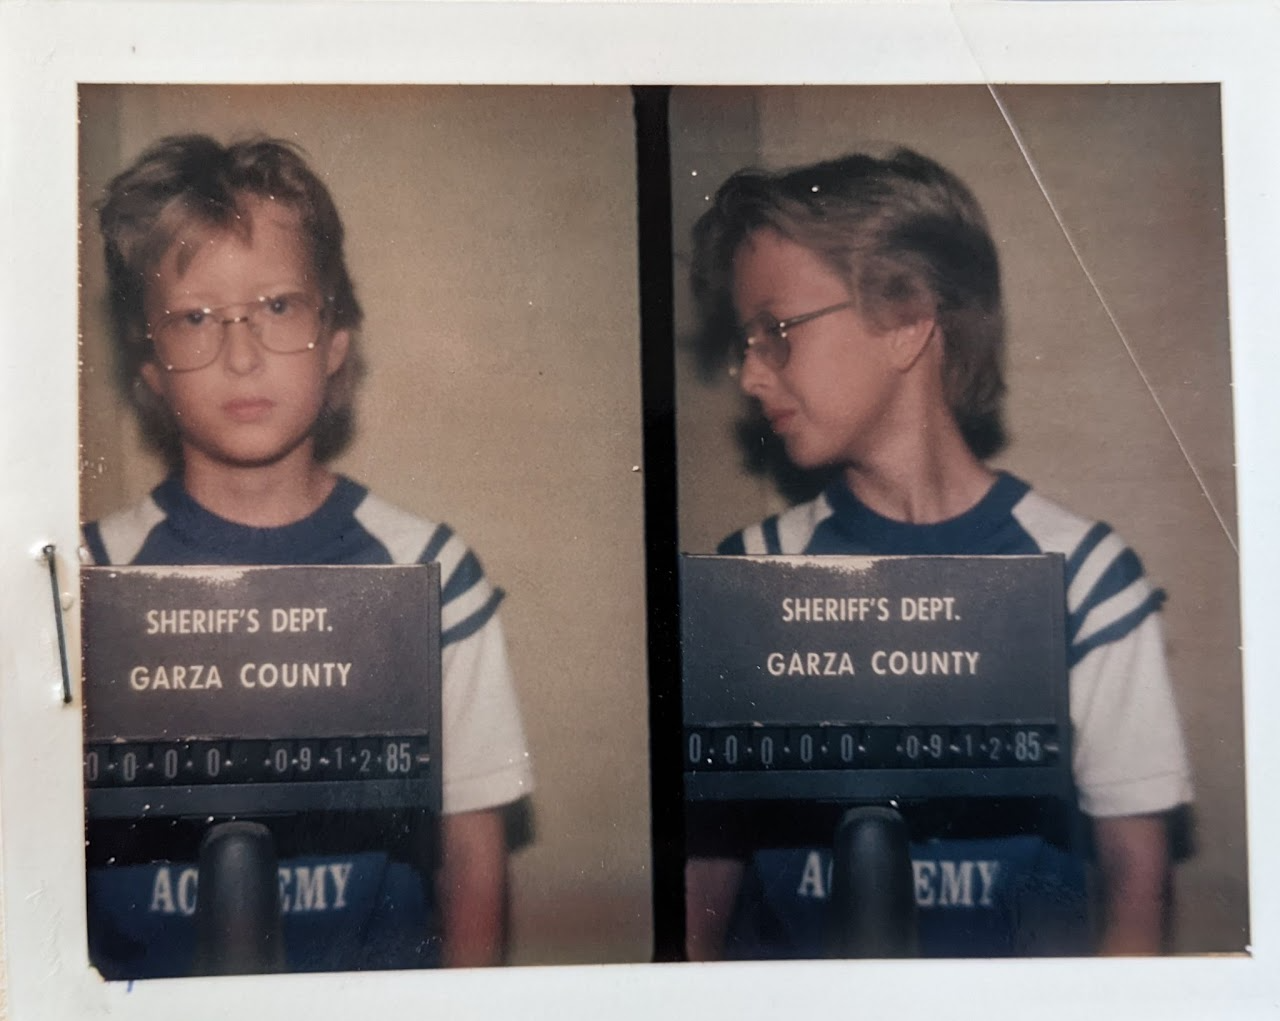 Picture of Bobby T. Lewis being booked into jail as a frickin' kid.